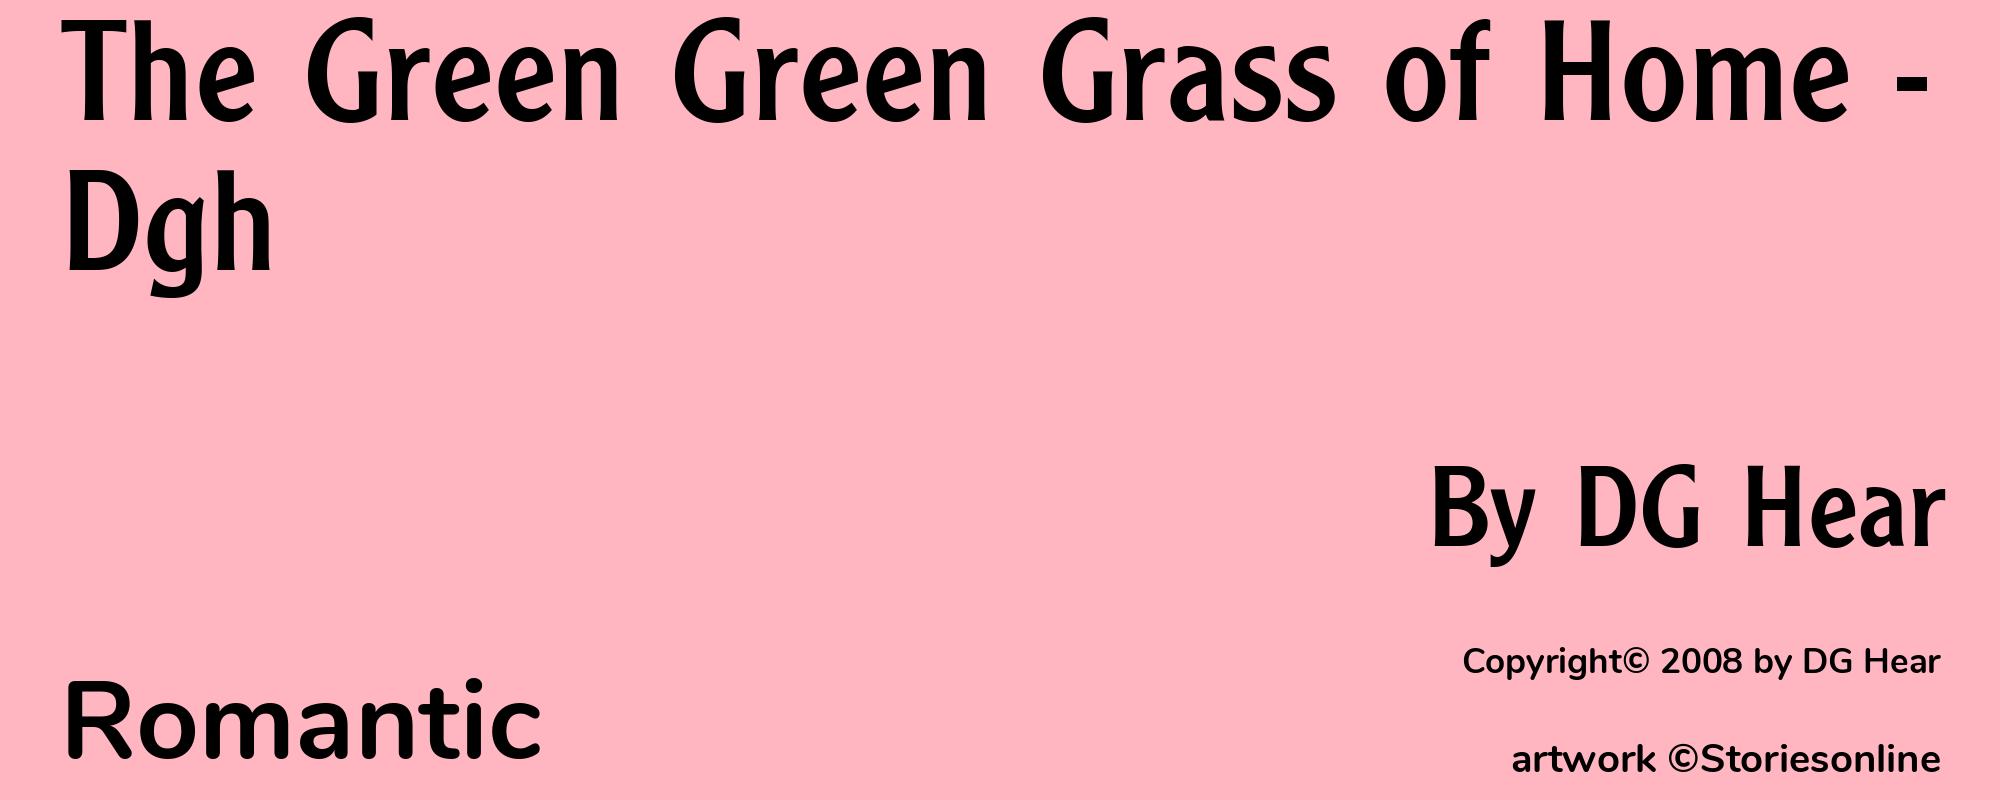 The Green Green Grass of Home - Dgh - Cover